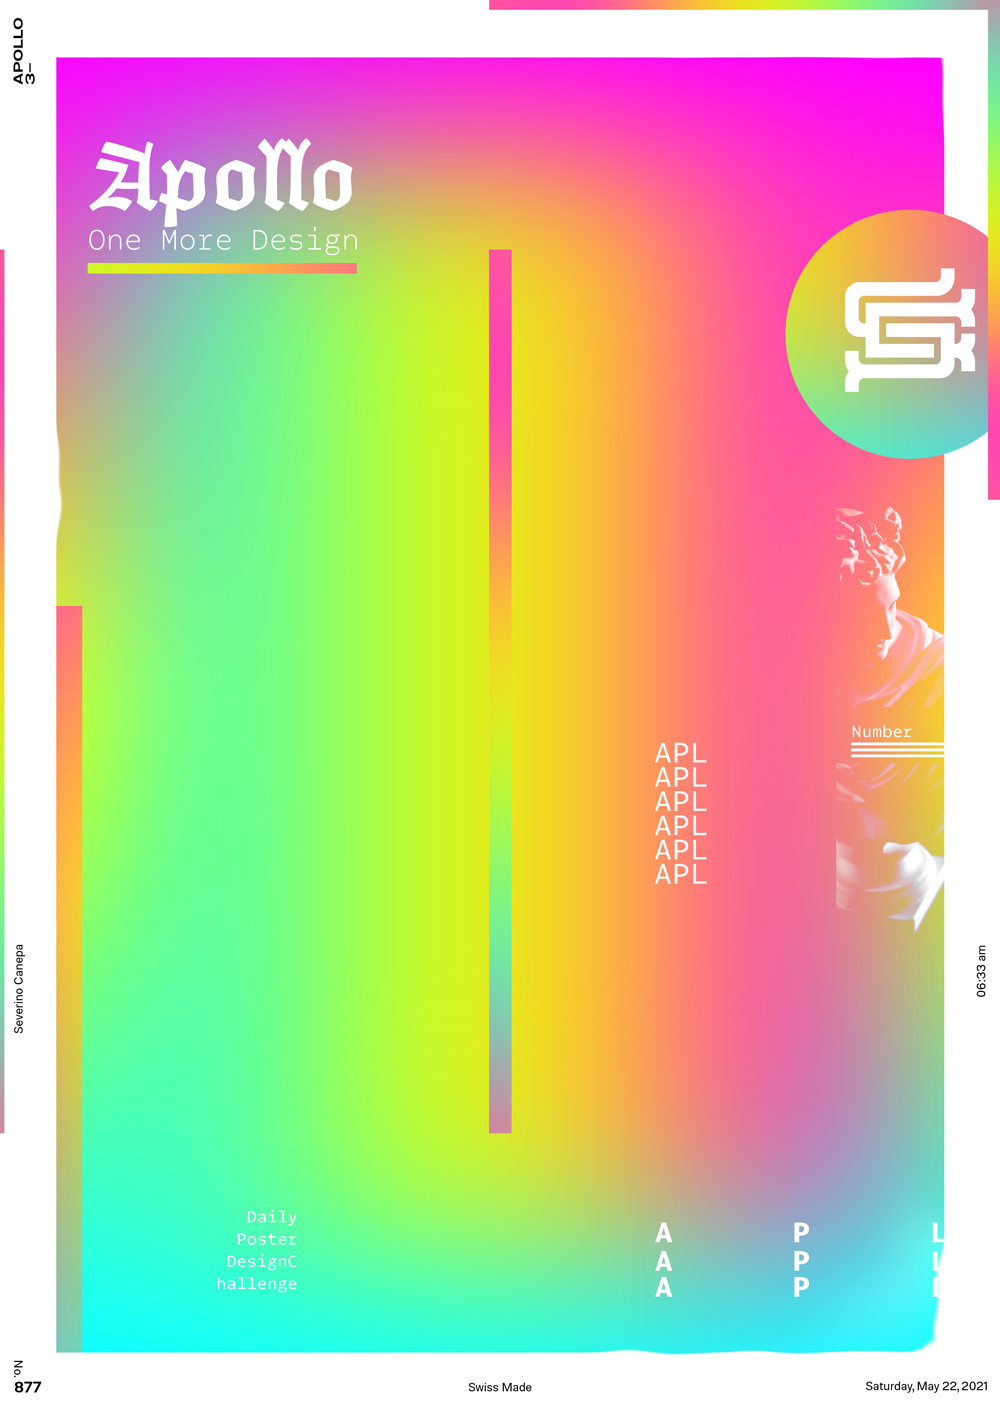 Graphic poster creation I create with a colorful gradient and typography